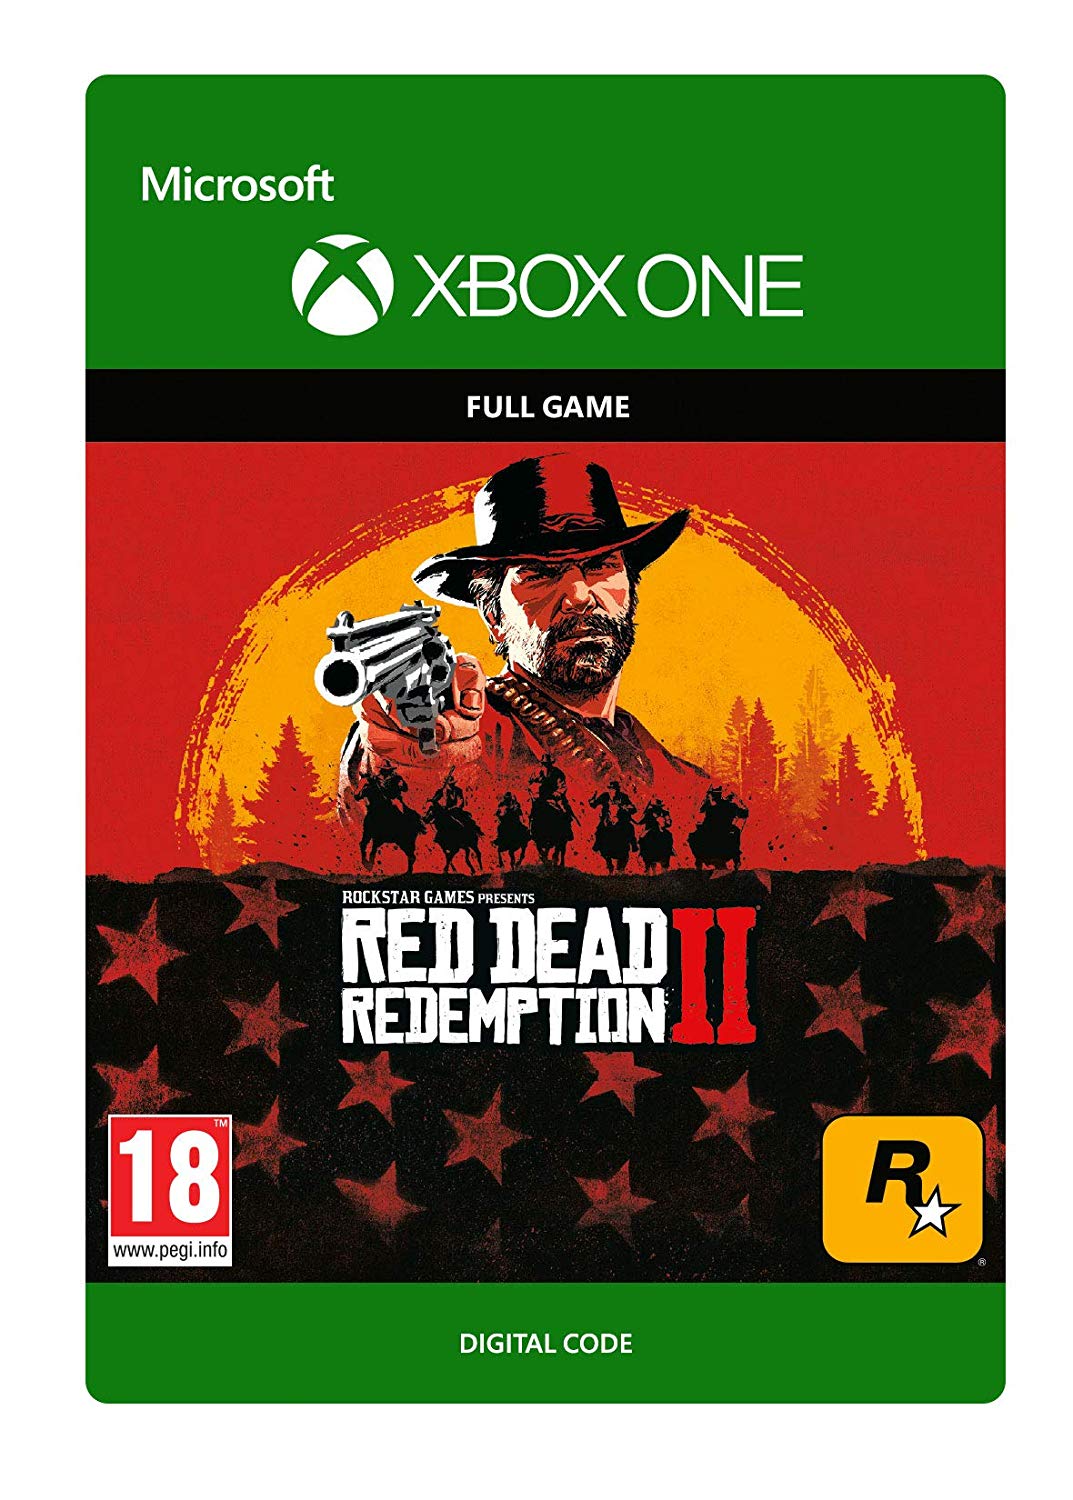 Red Dead Redemption 2 Xbox One, download code 